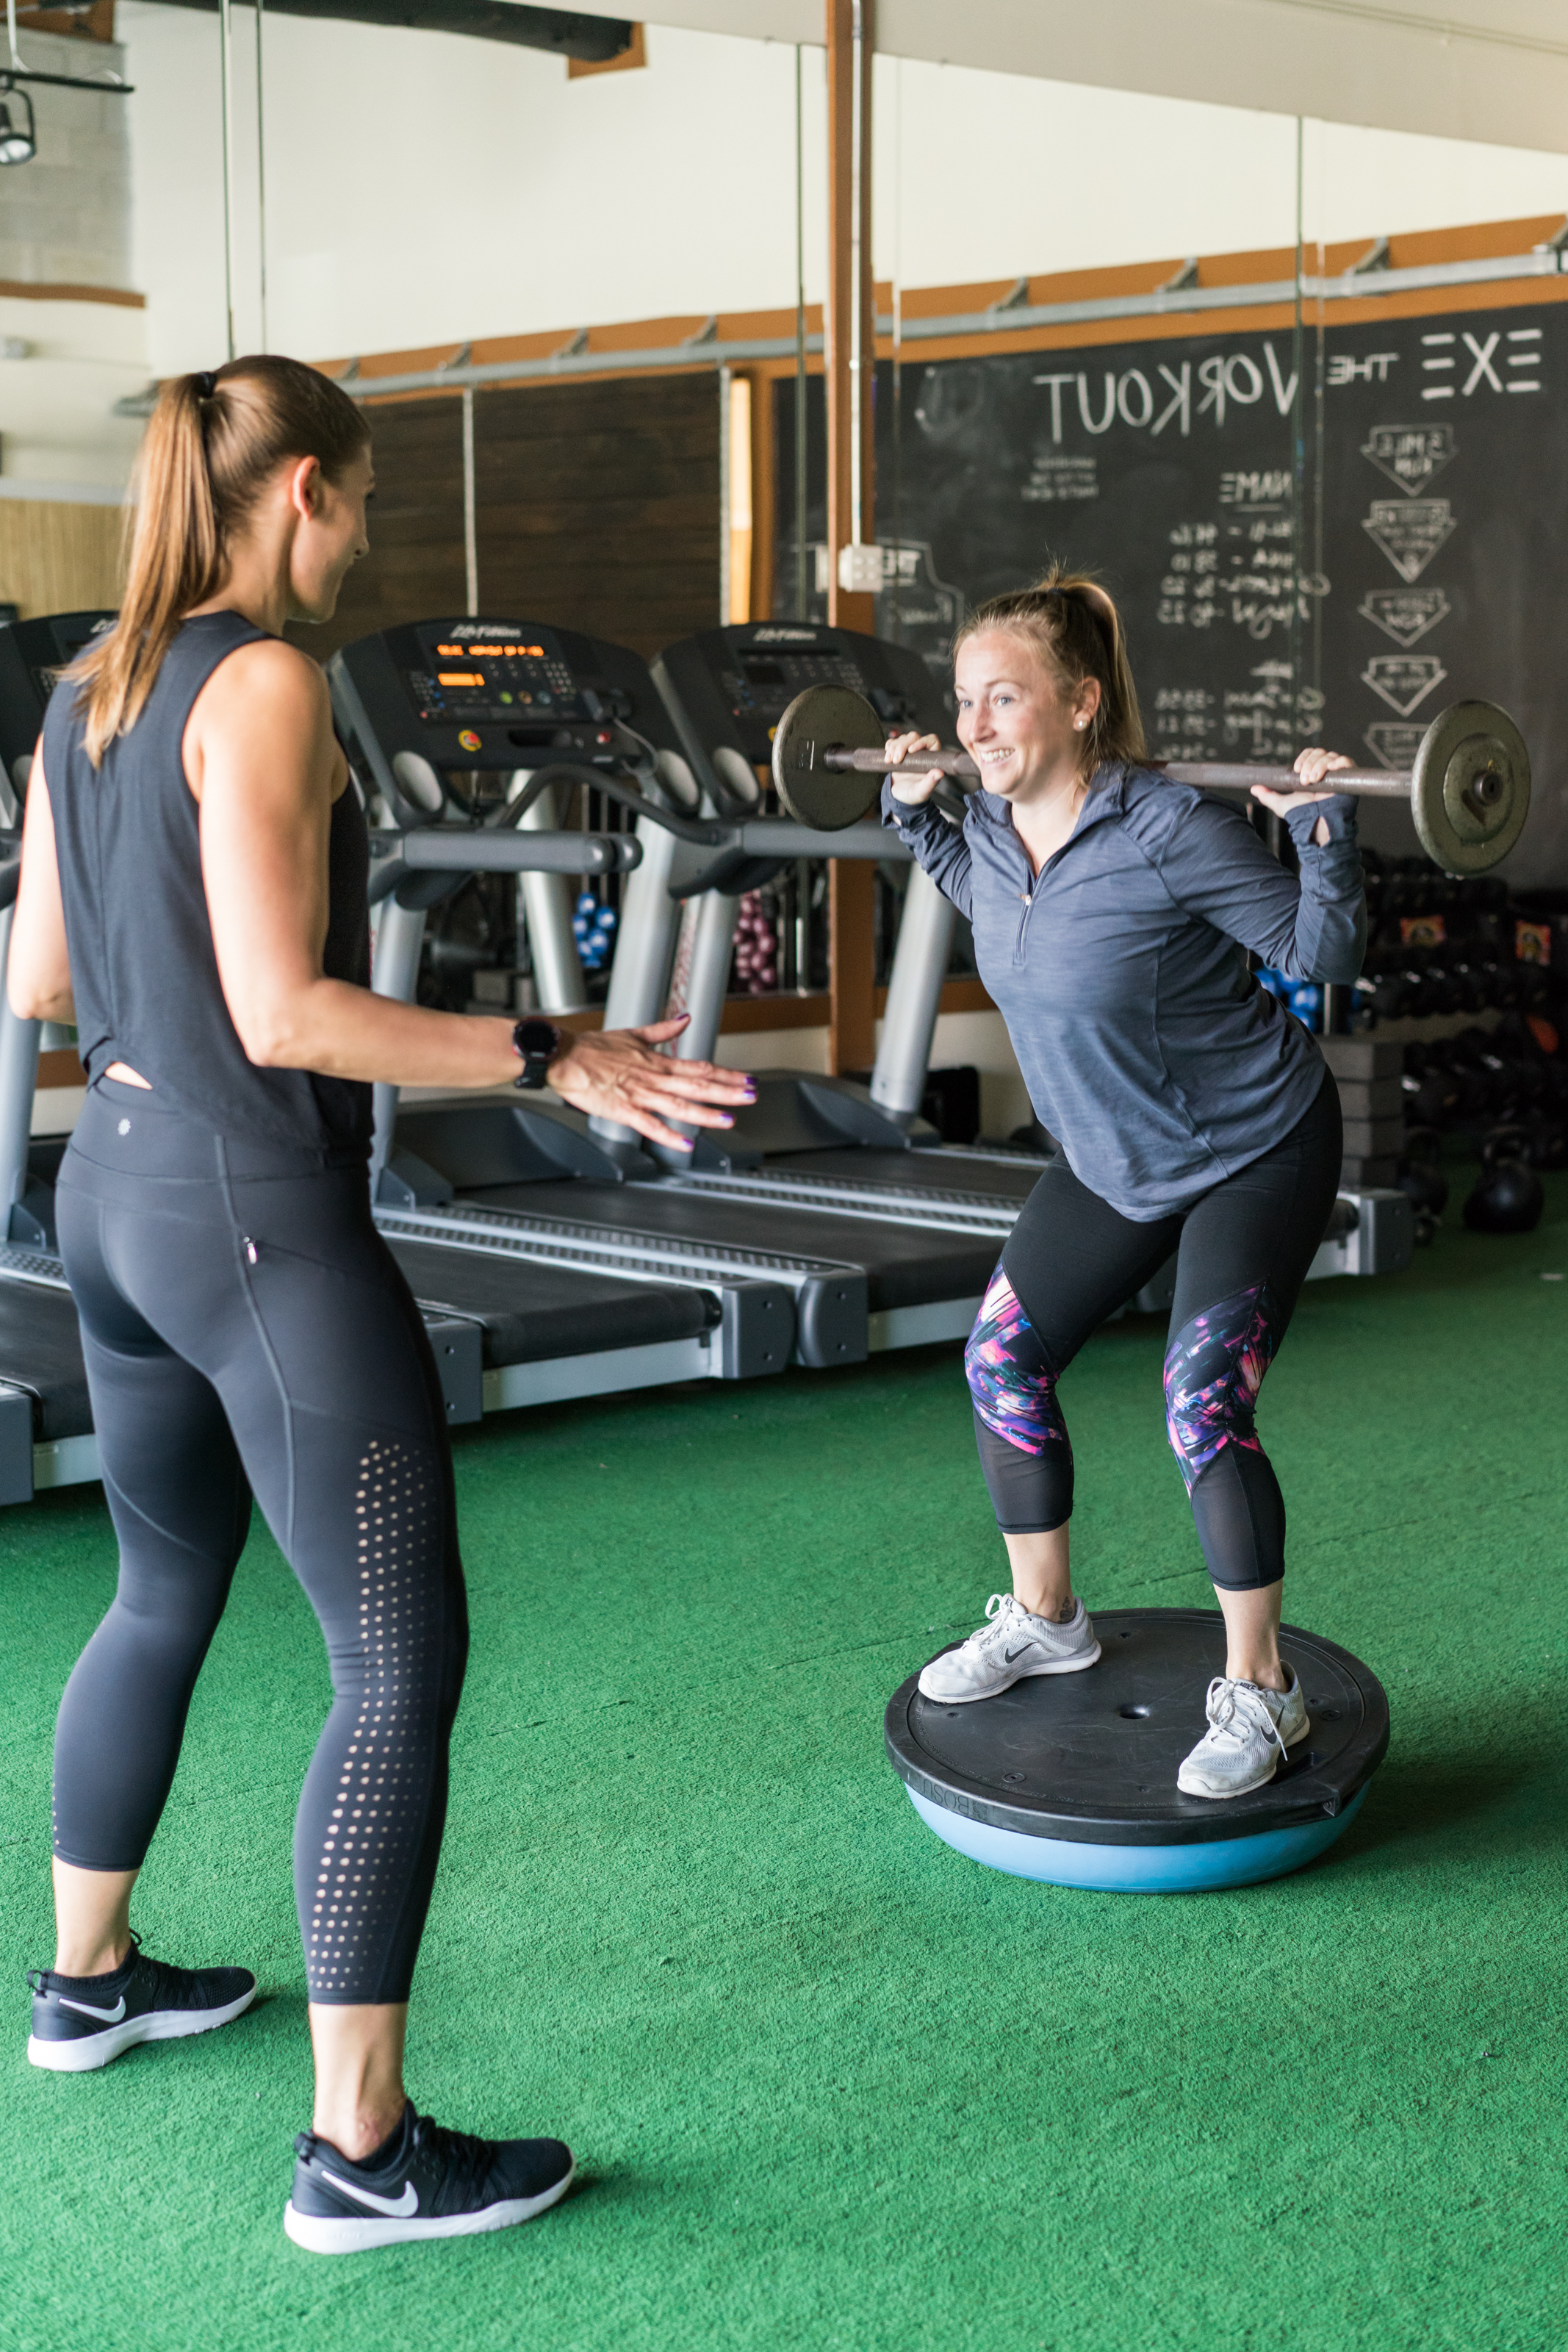 A personal trainer encouraging a client balancing and holding a weight behind her shoulders